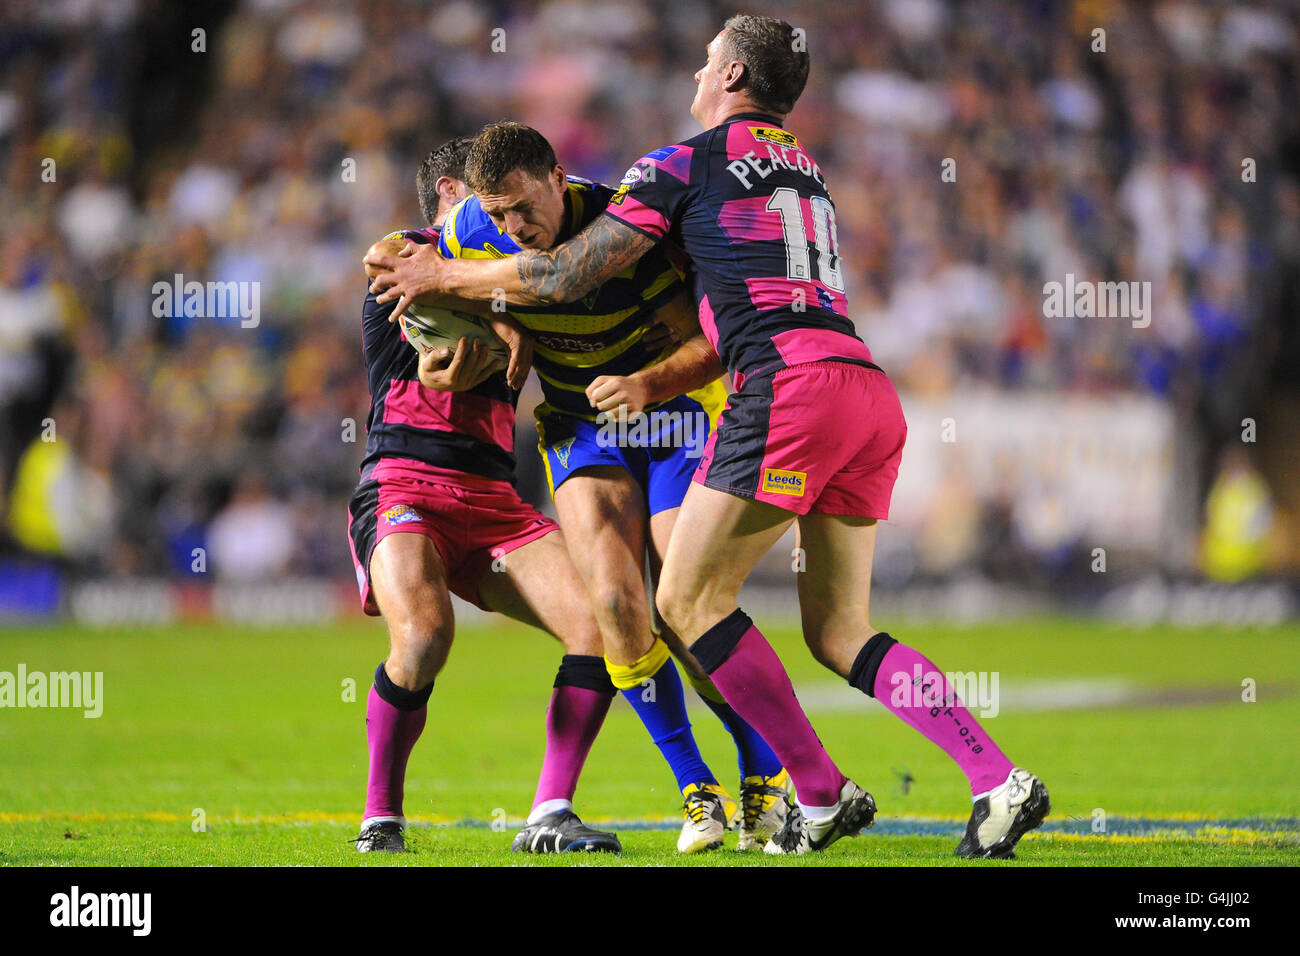 Warrington Wolves' Simon Grix is tackled by Leeds Rhinos' Danny Buderus and Jamie Peacock during the engage Super League, Semi Final match at the Halliwell Jones Stadium, Warrington. Stock Photo